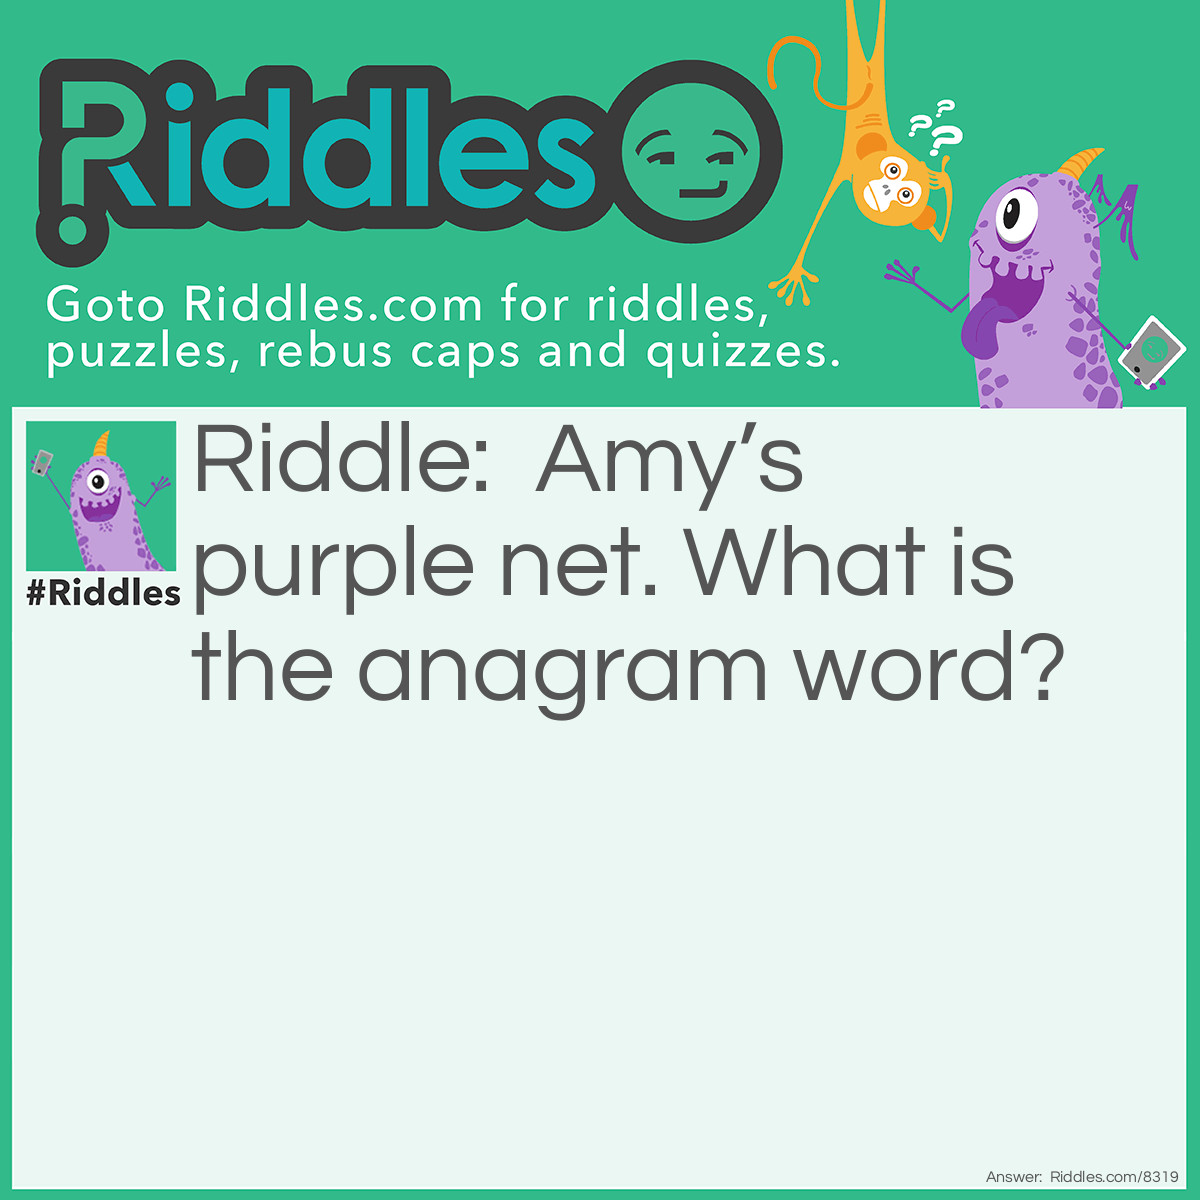 Riddle: Amy's purple net. What is the anagrammed word? Answer: Supplementary.